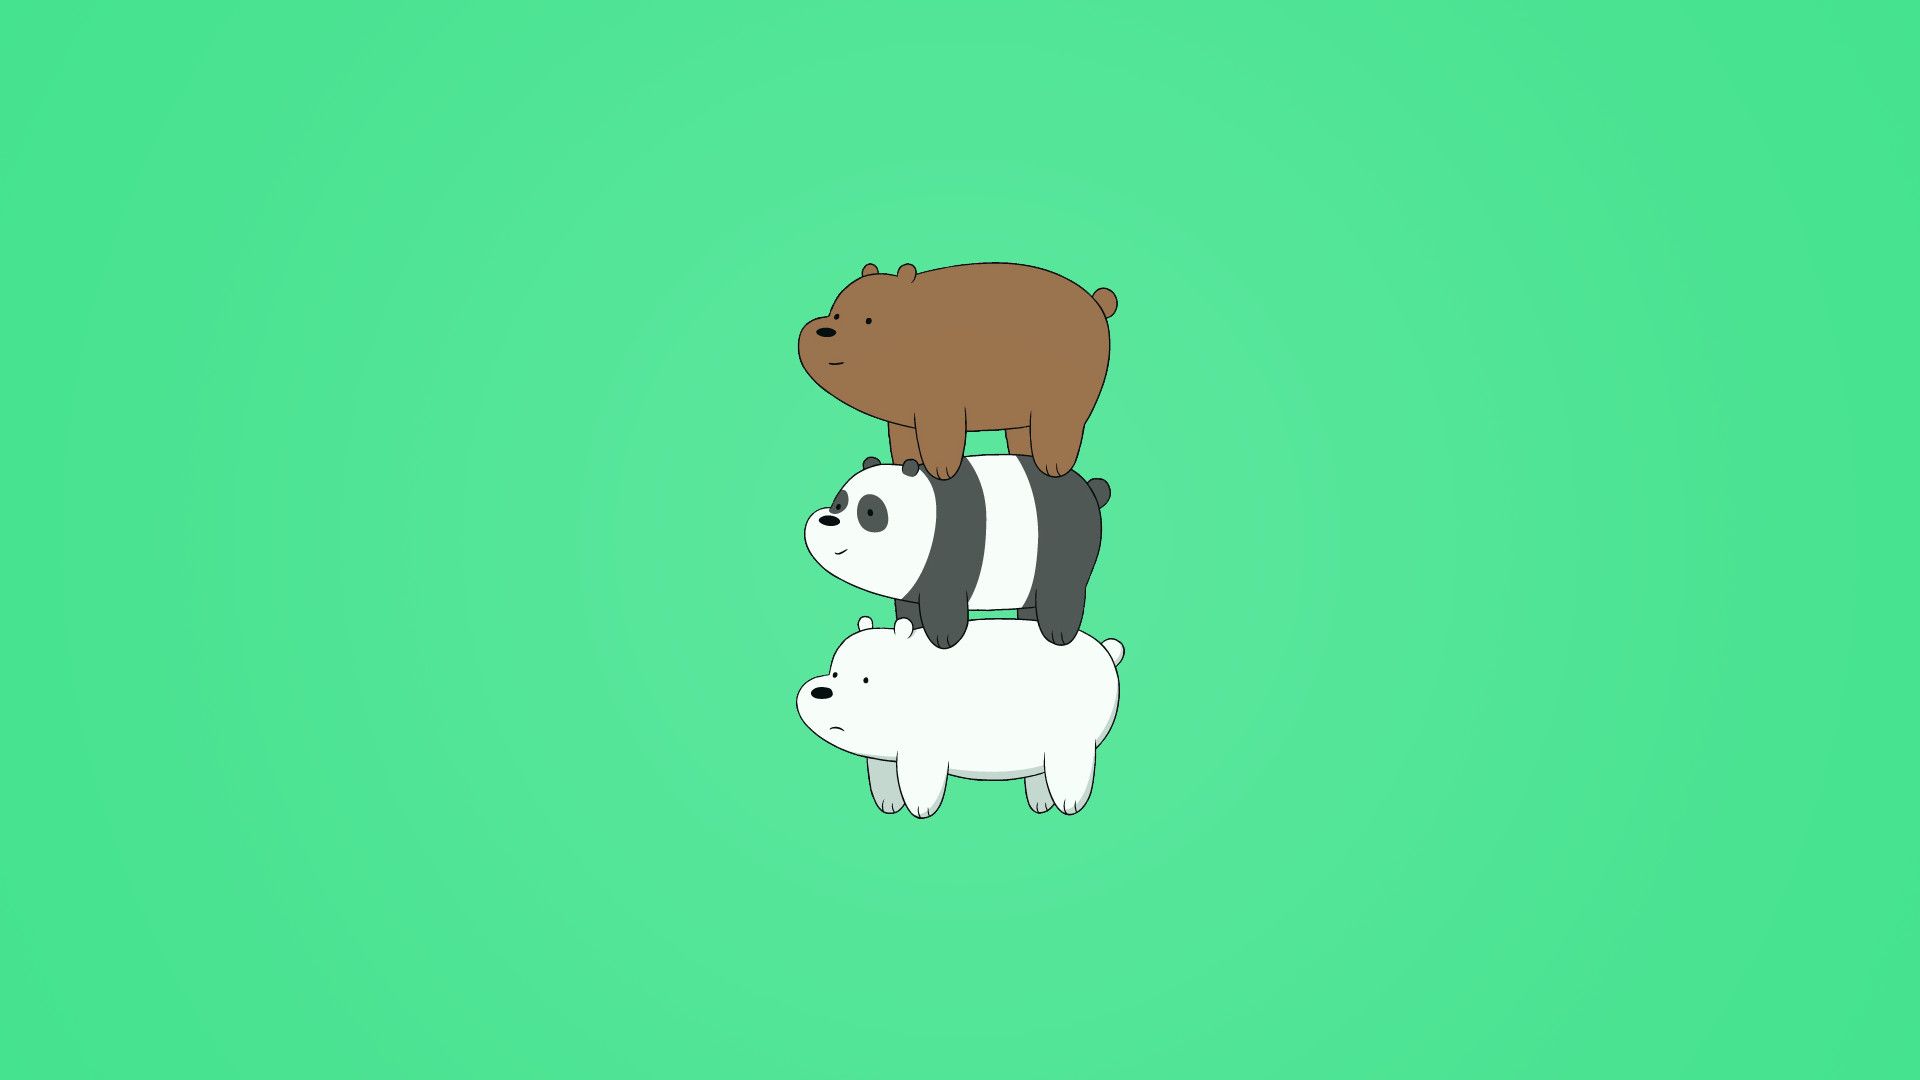 A cute bear and panda on top of each other - We Bare Bears